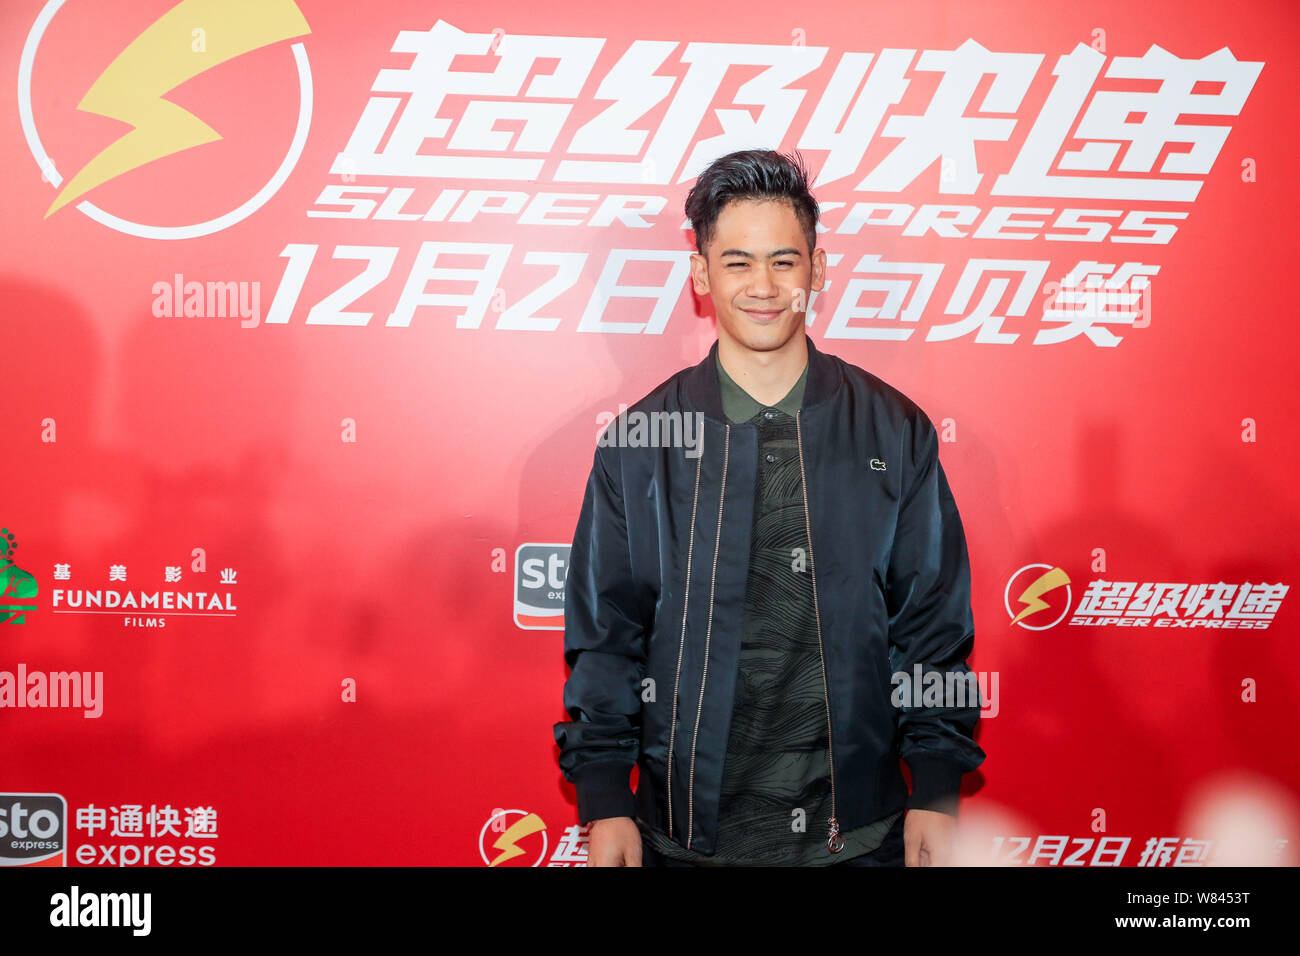 Taiwanese-American actor Mason Lee, the son of Taiwanese director Ang Lee, poses at a press conference for the premiere of his movie 'Super Express' i Stock Photo